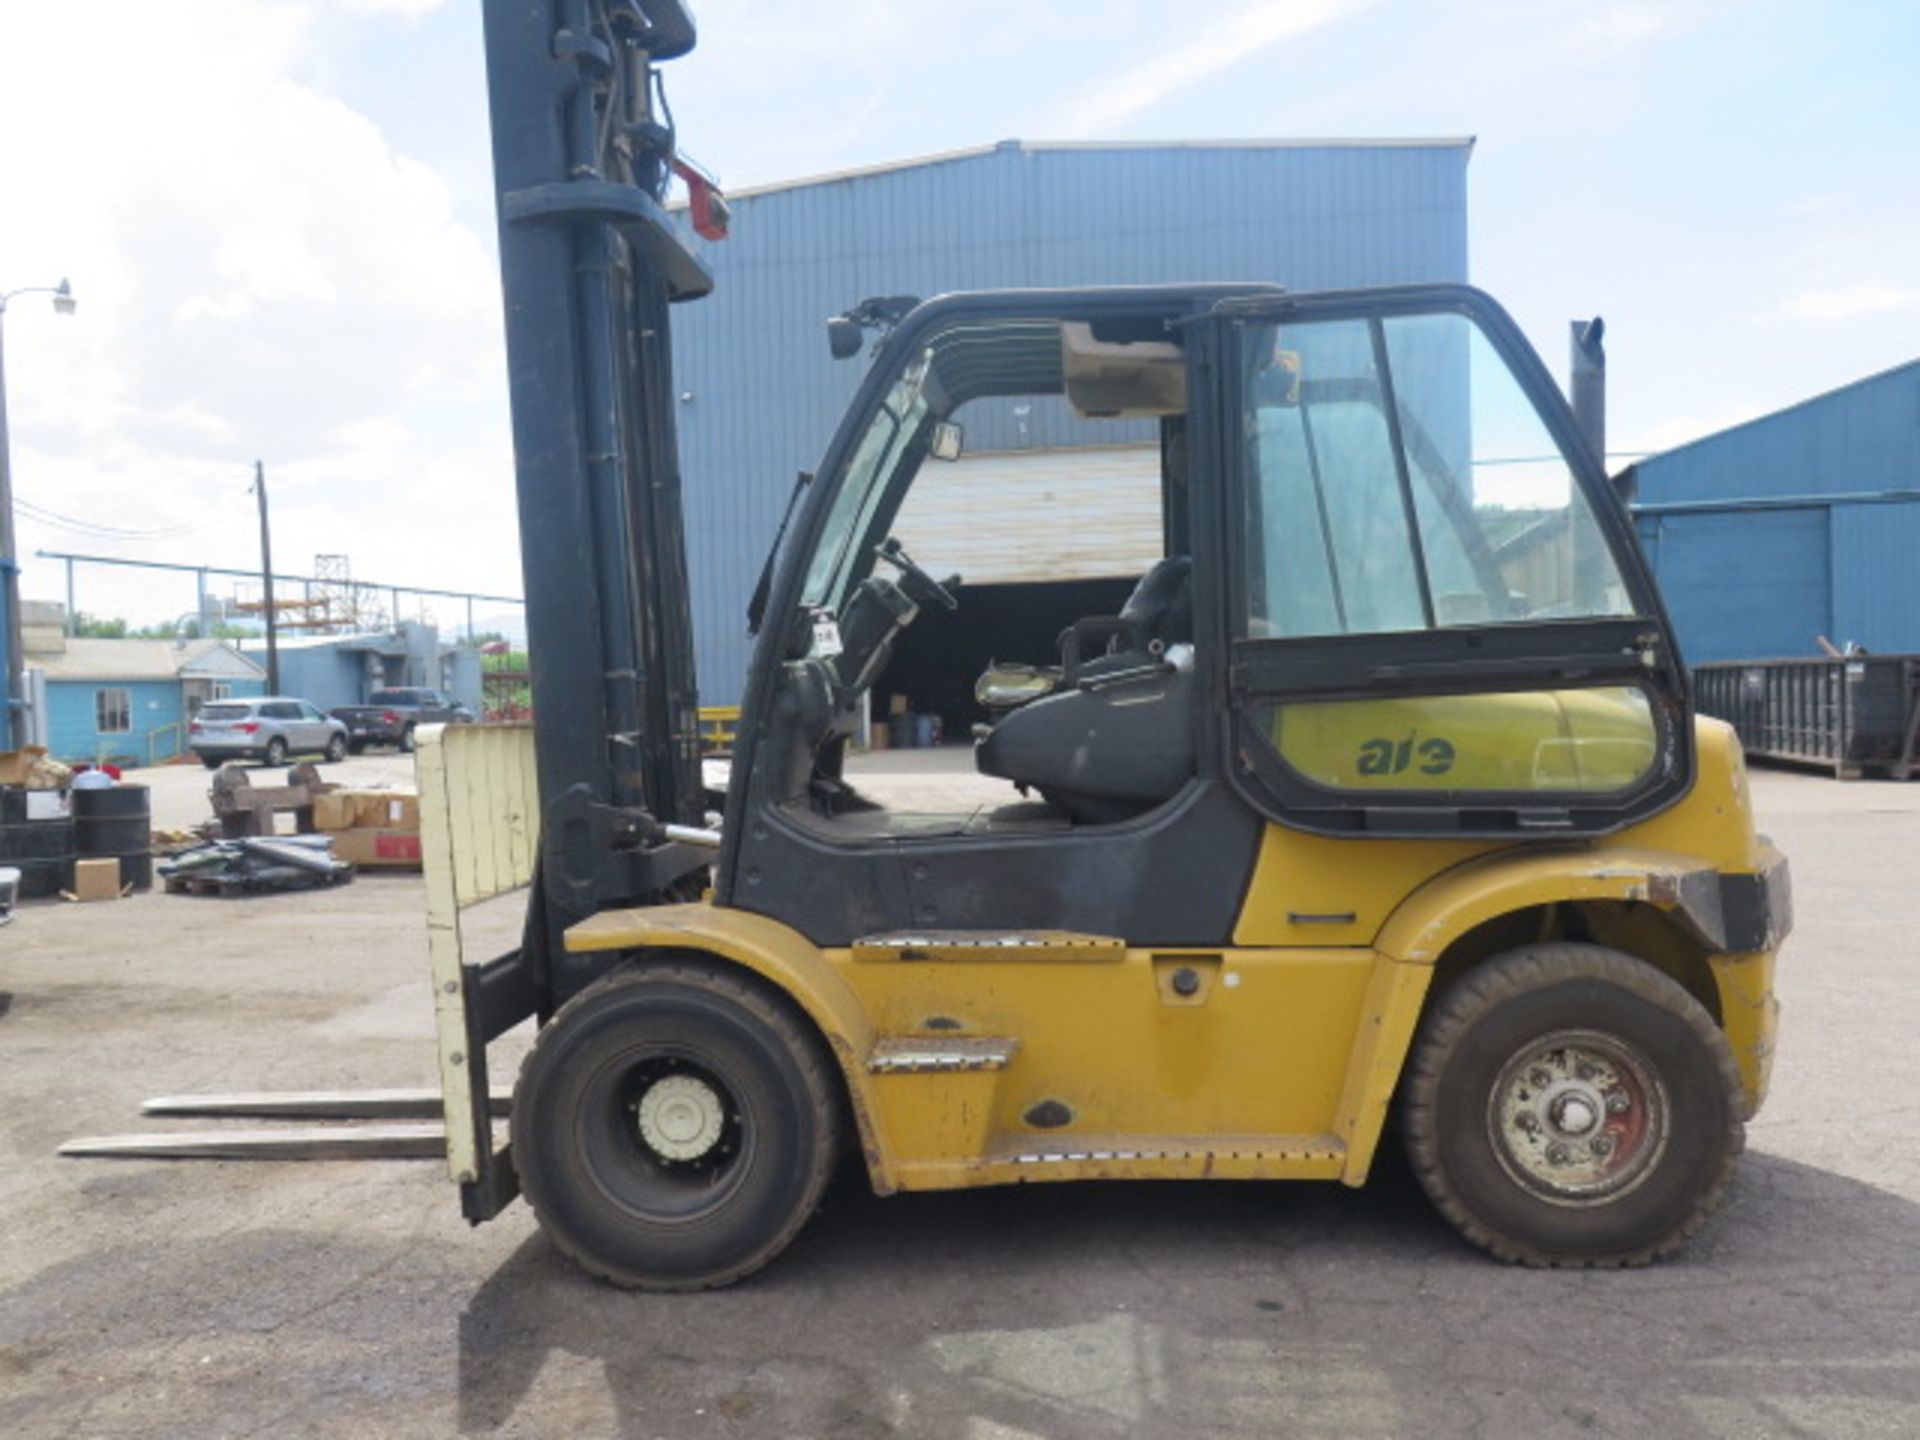 Yale GDP155VXNCHV148 15,400 Lb Cap Diesel Forklift s/n C878V01753F w/ 2-Stage Tall Mast, 212” Lift